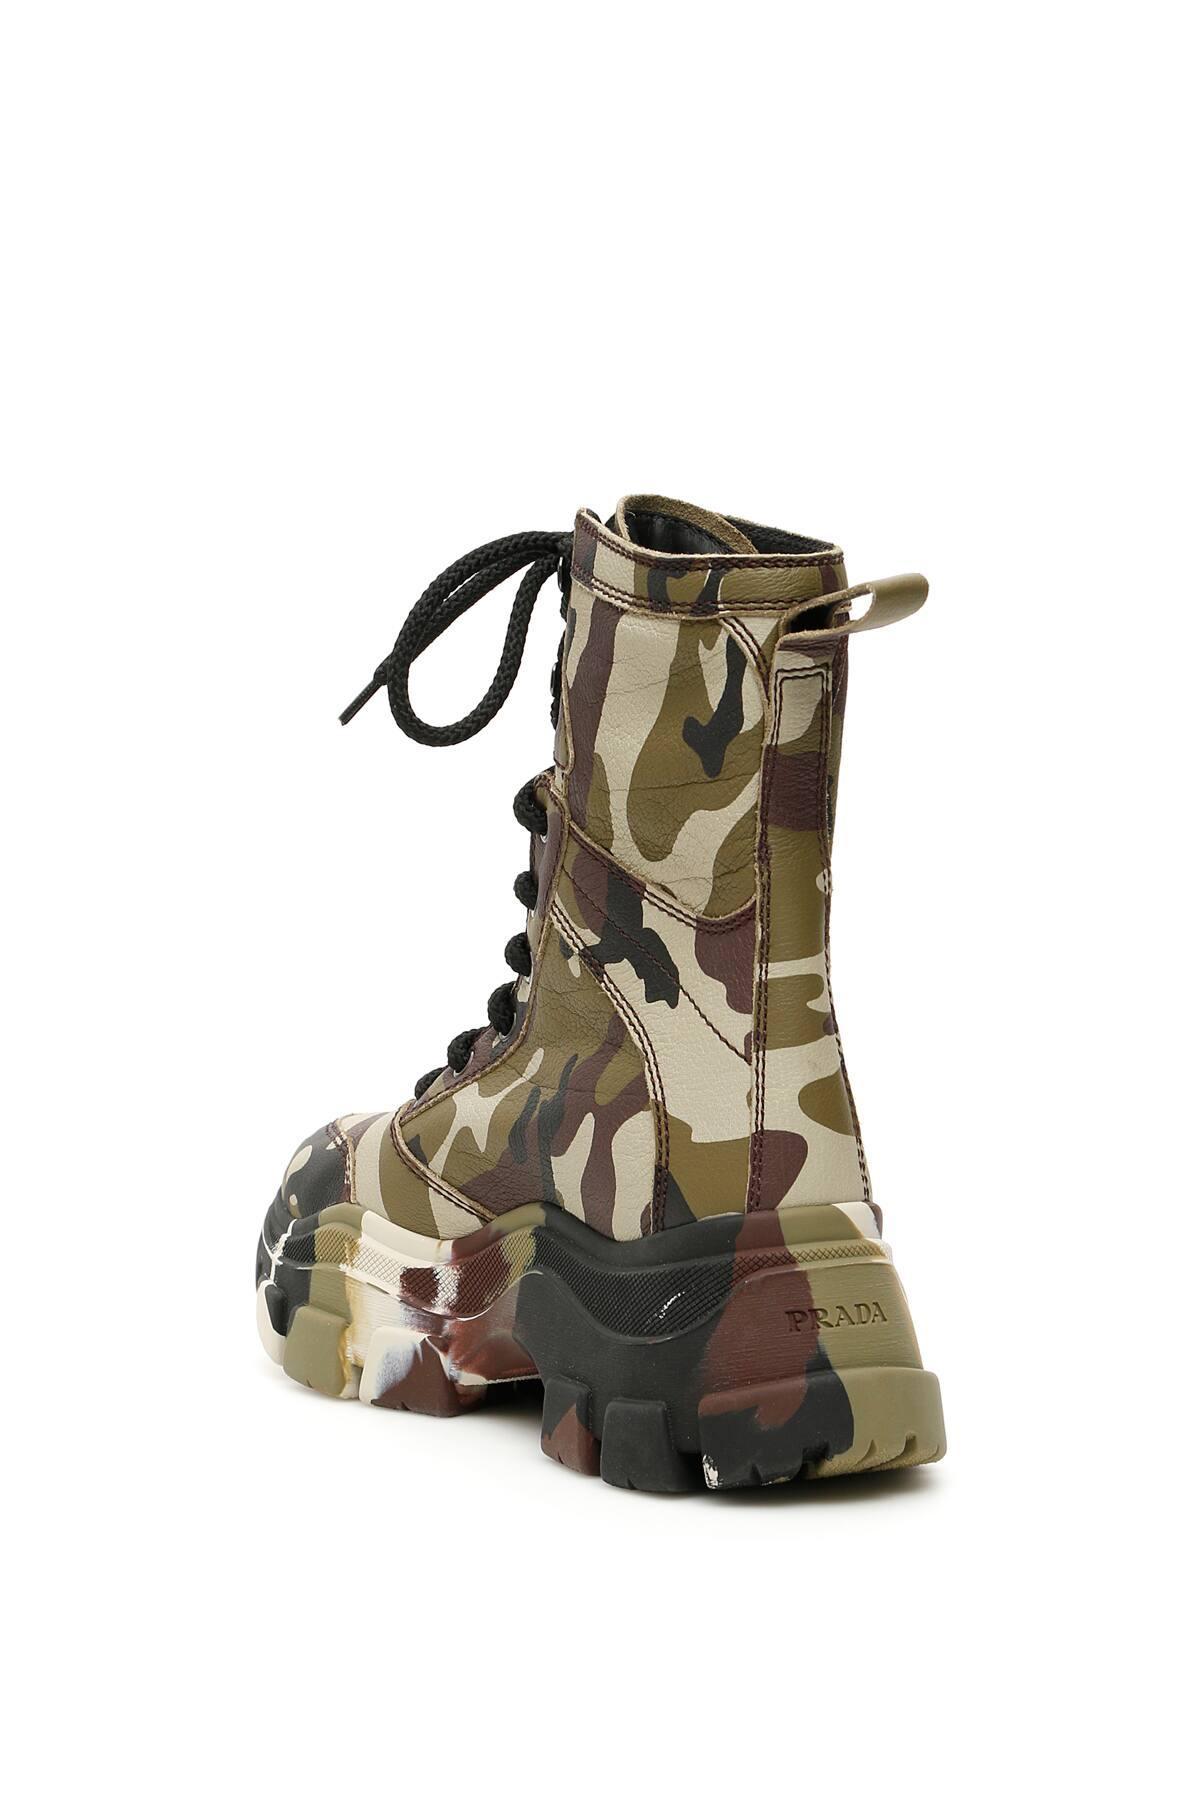 Prada Leather Camouflage Combat Boots in Green,Brown,Beige (Green) - Lyst